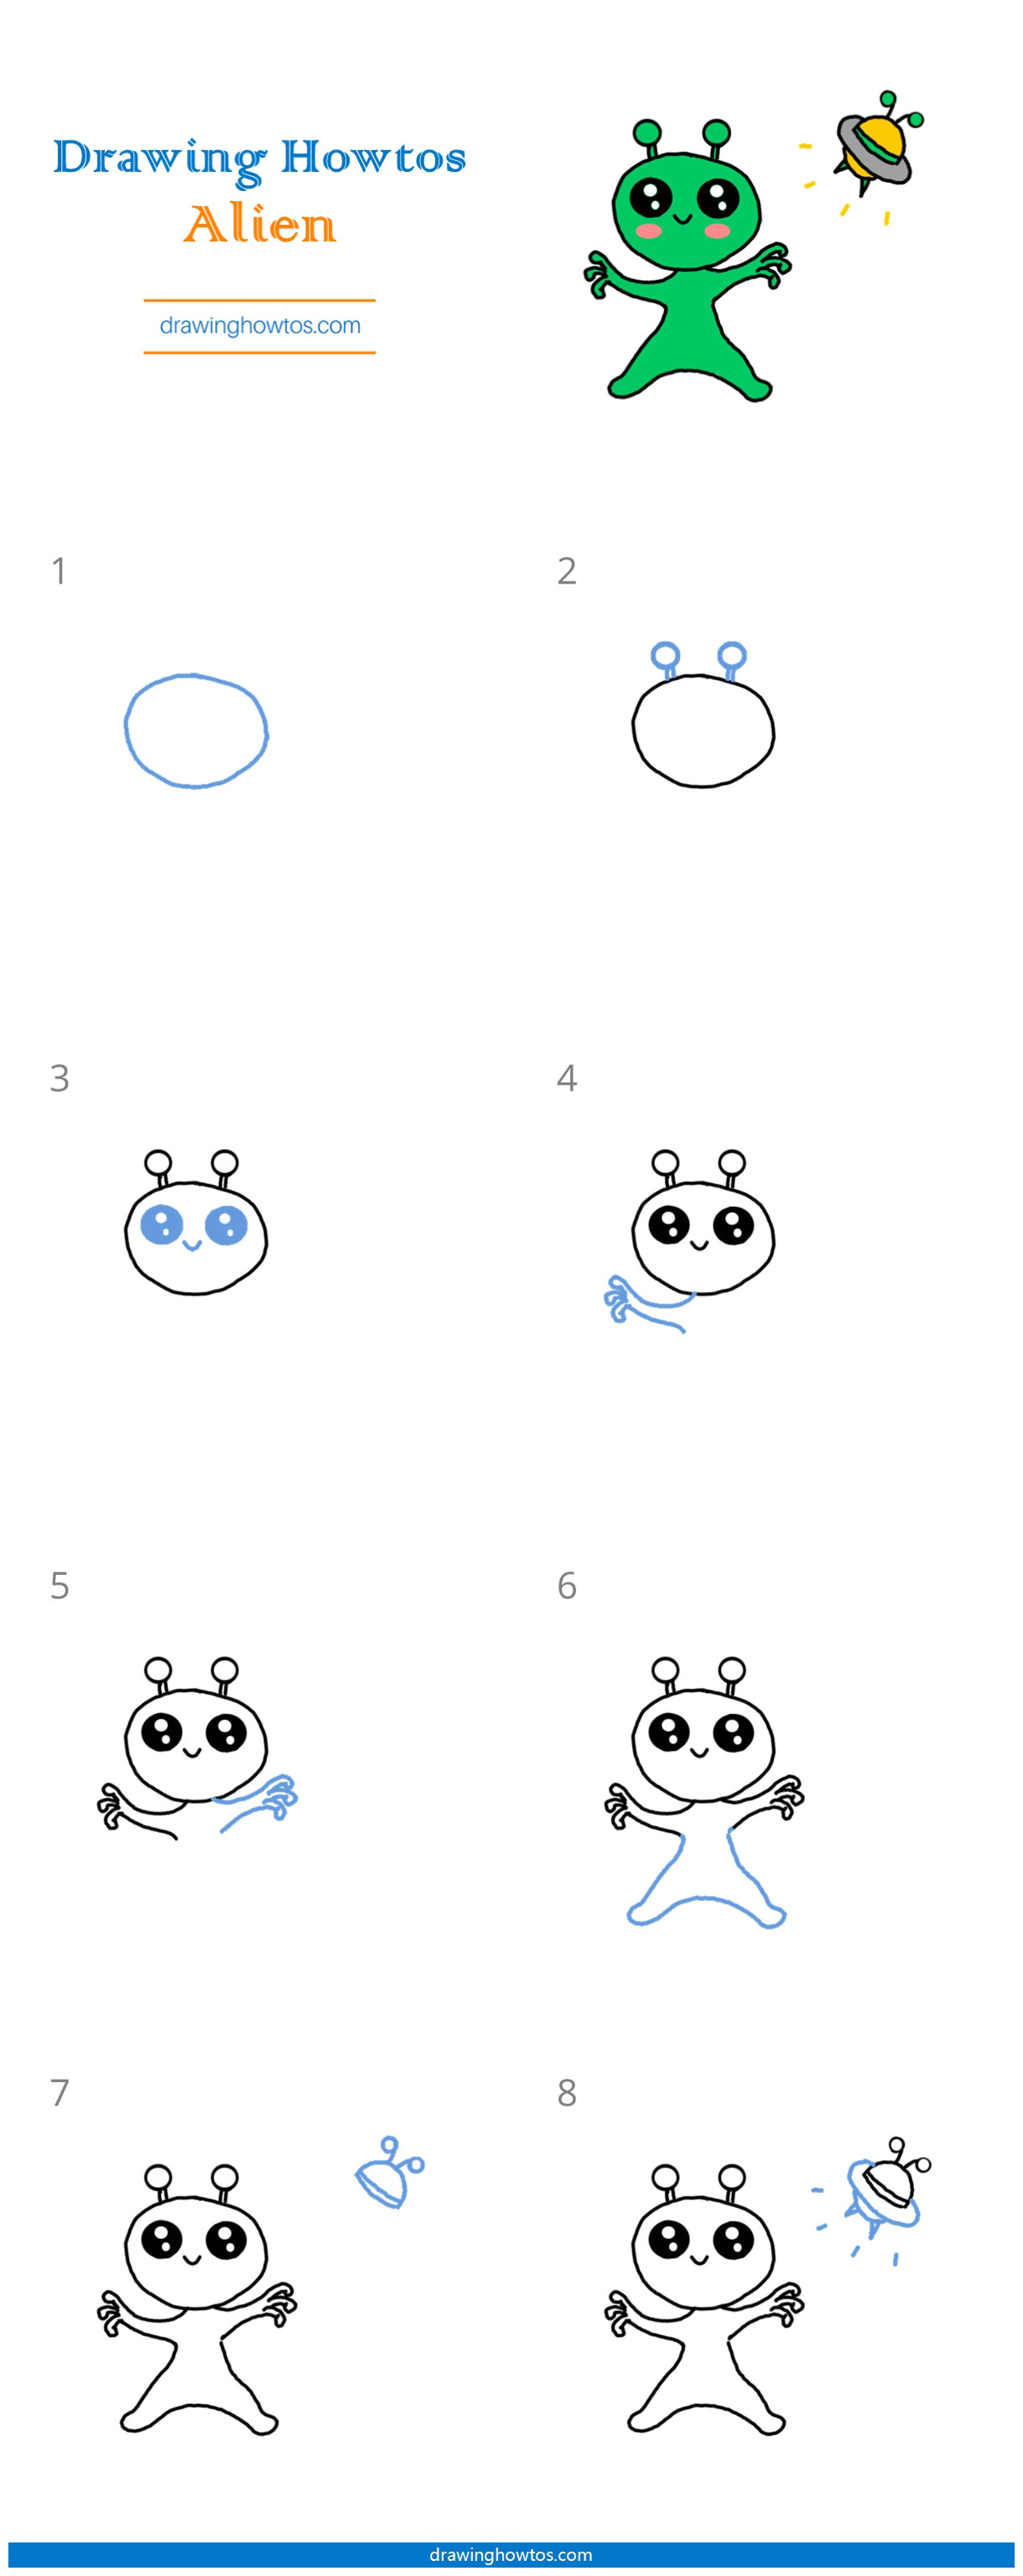 How to Draw a Funny Alien Step by Step